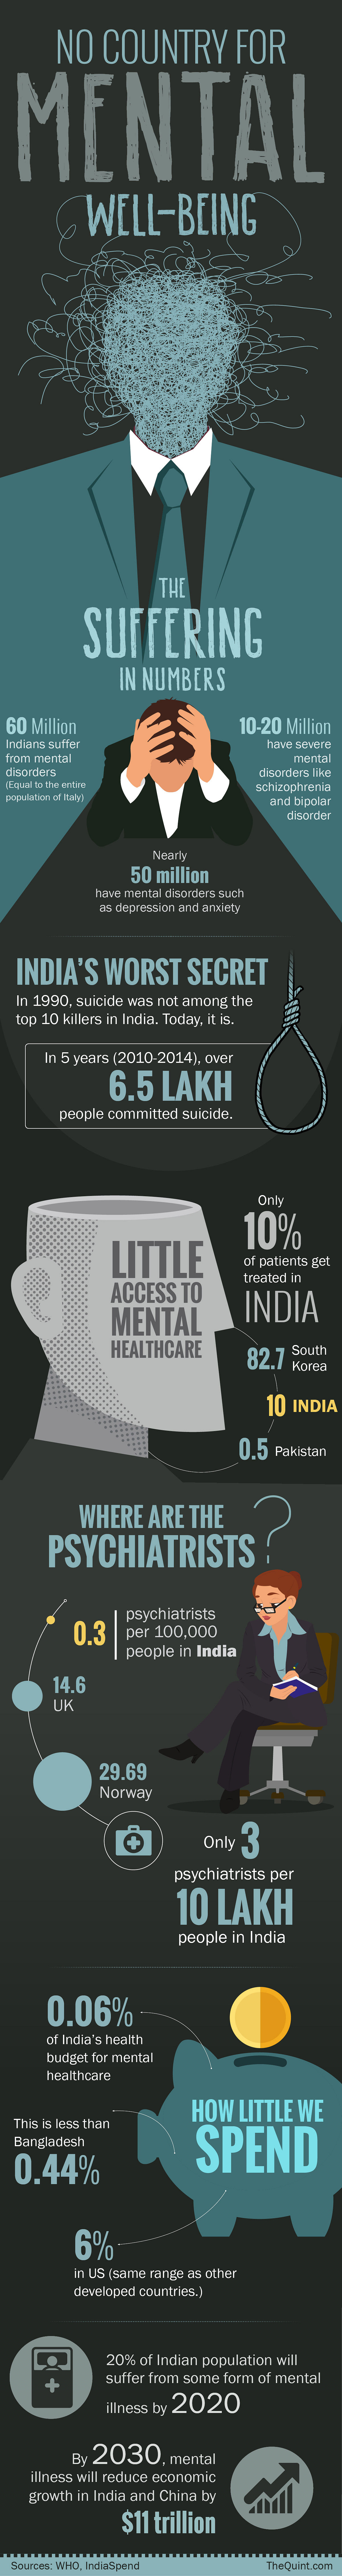 Suicide is one of the top 10 killers in India, a country that has three psychiatrists per 10 lakh people.